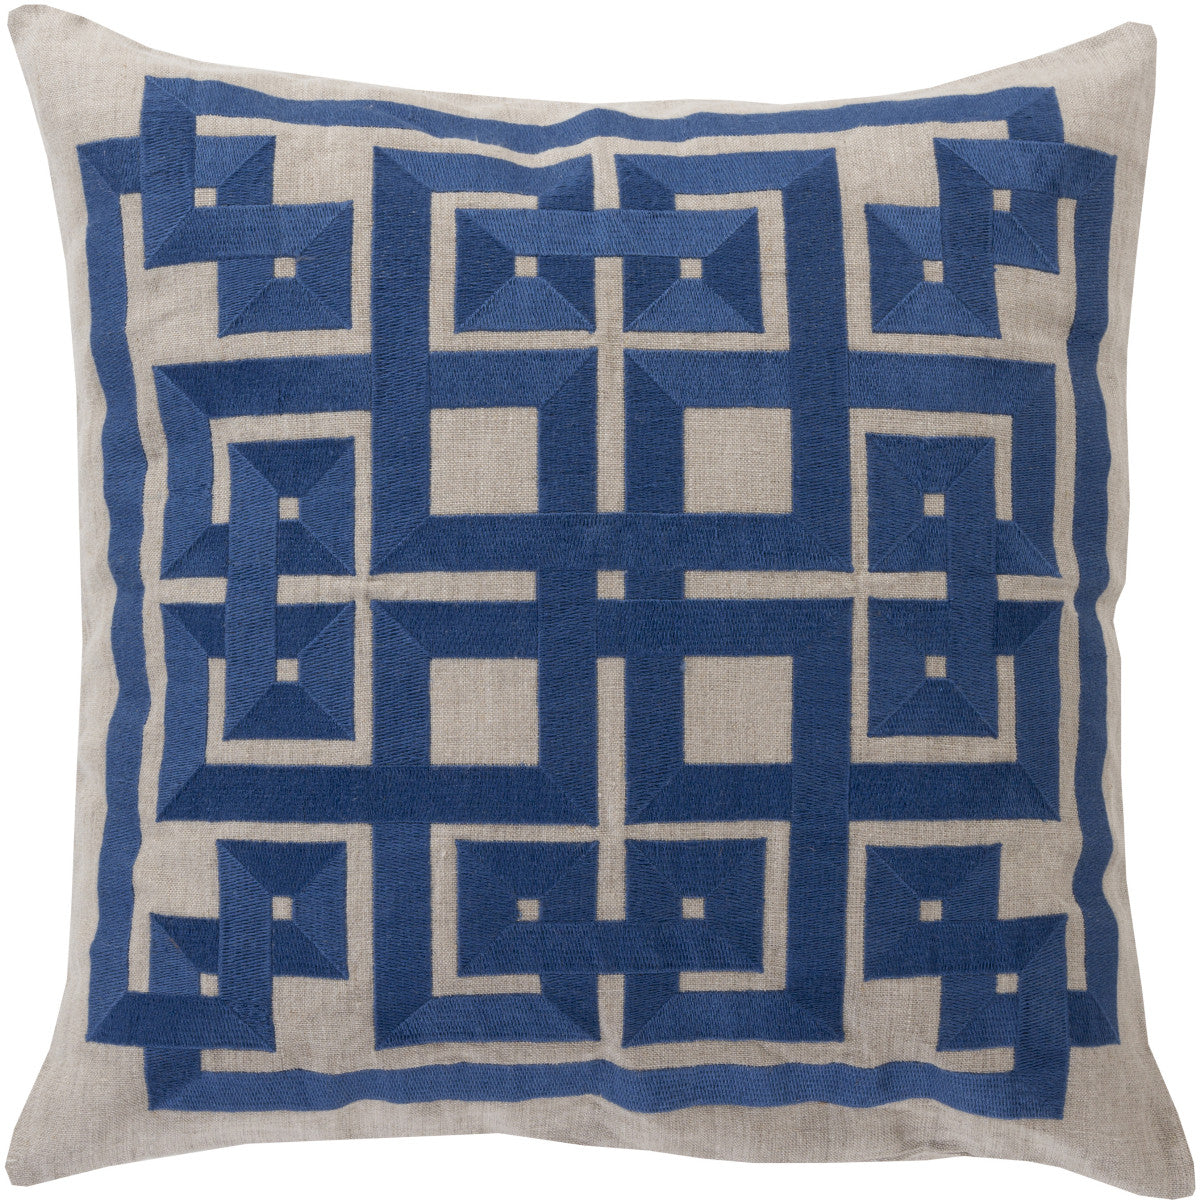 Surya Gramercy Intersected Geometrics LD-002 Pillow by Beth Lacefield